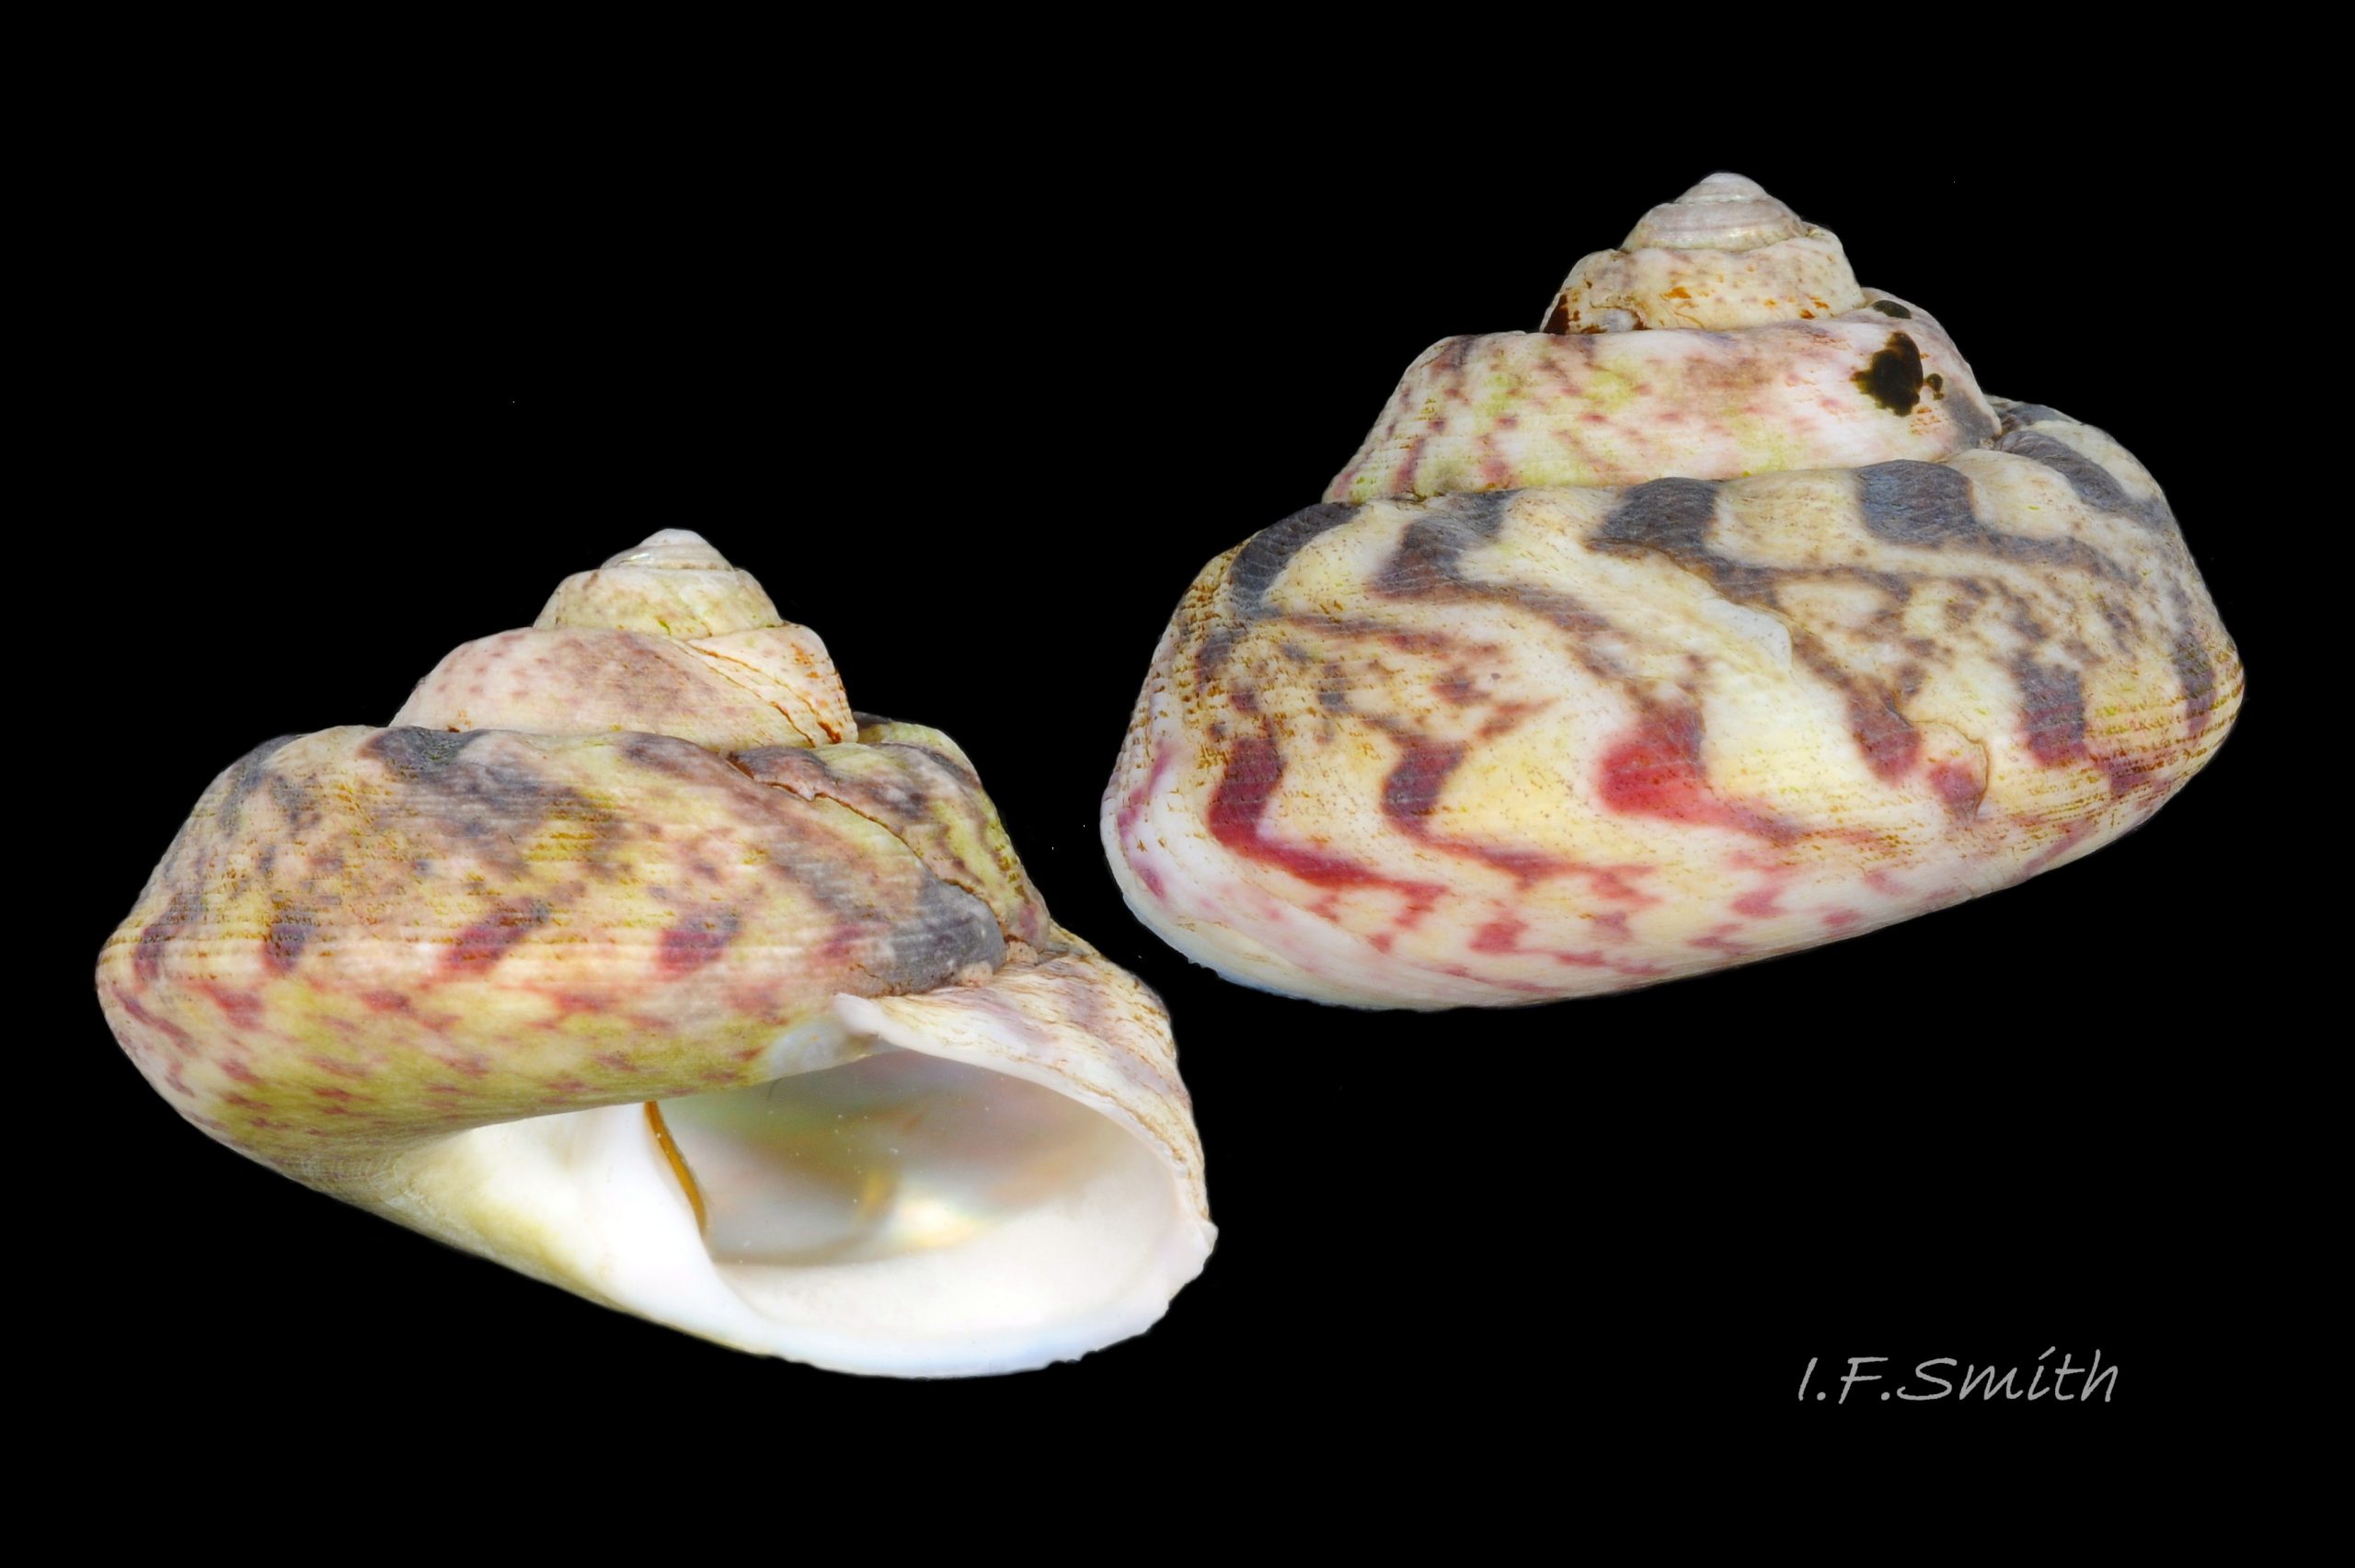 09 Gibbula magus. Height 19 mm, breadth 25 mm.  Cardigan Bay, Wales. 2015.